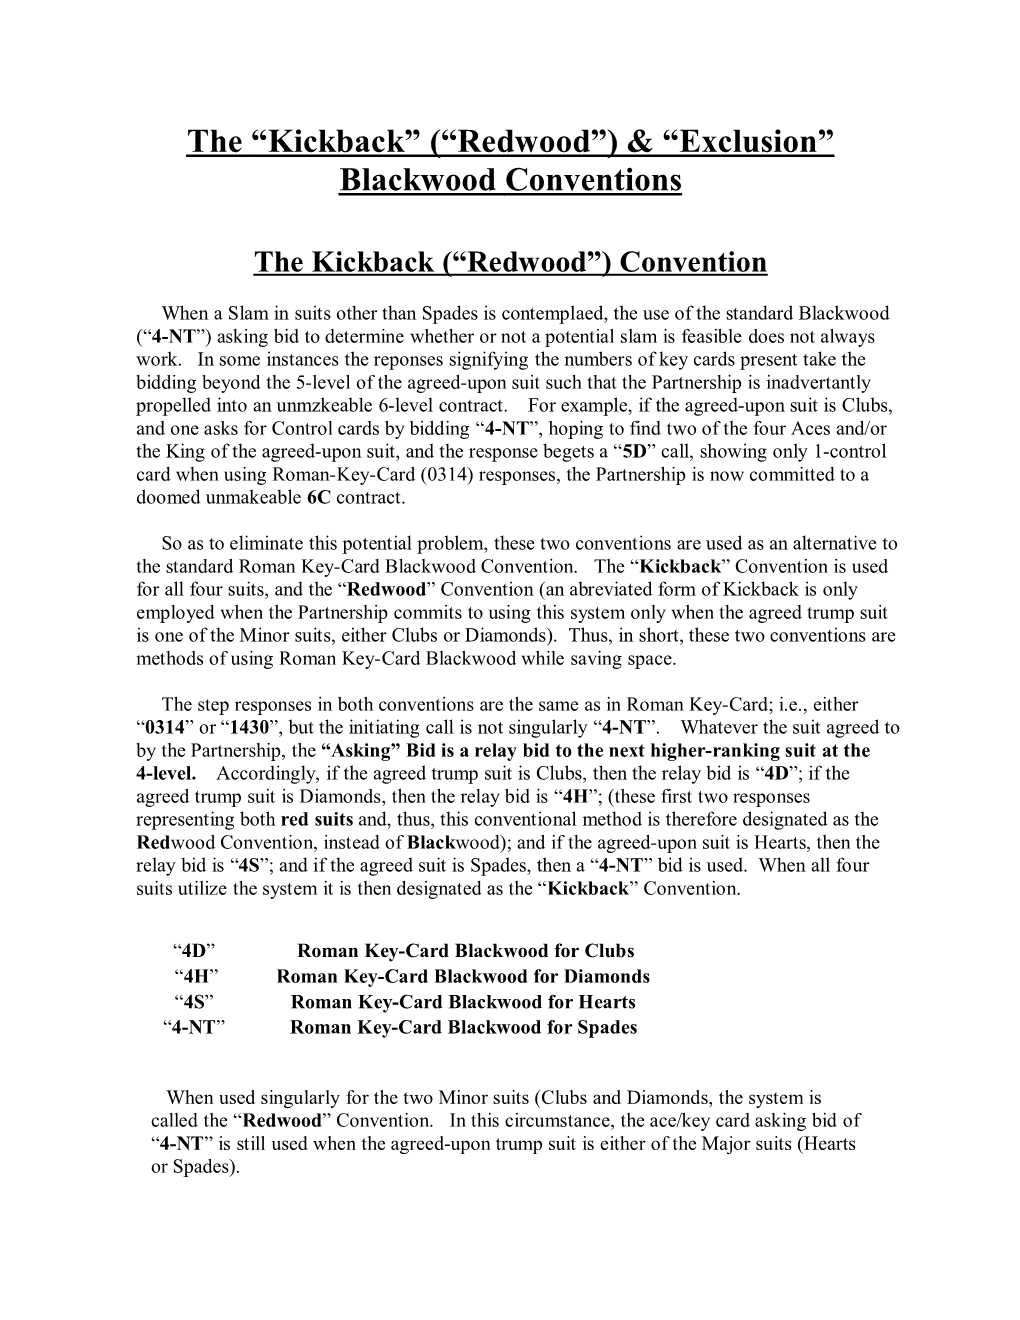 The “Kickback” (“Redwood”) & “Exclusion” Blackwood Conventions